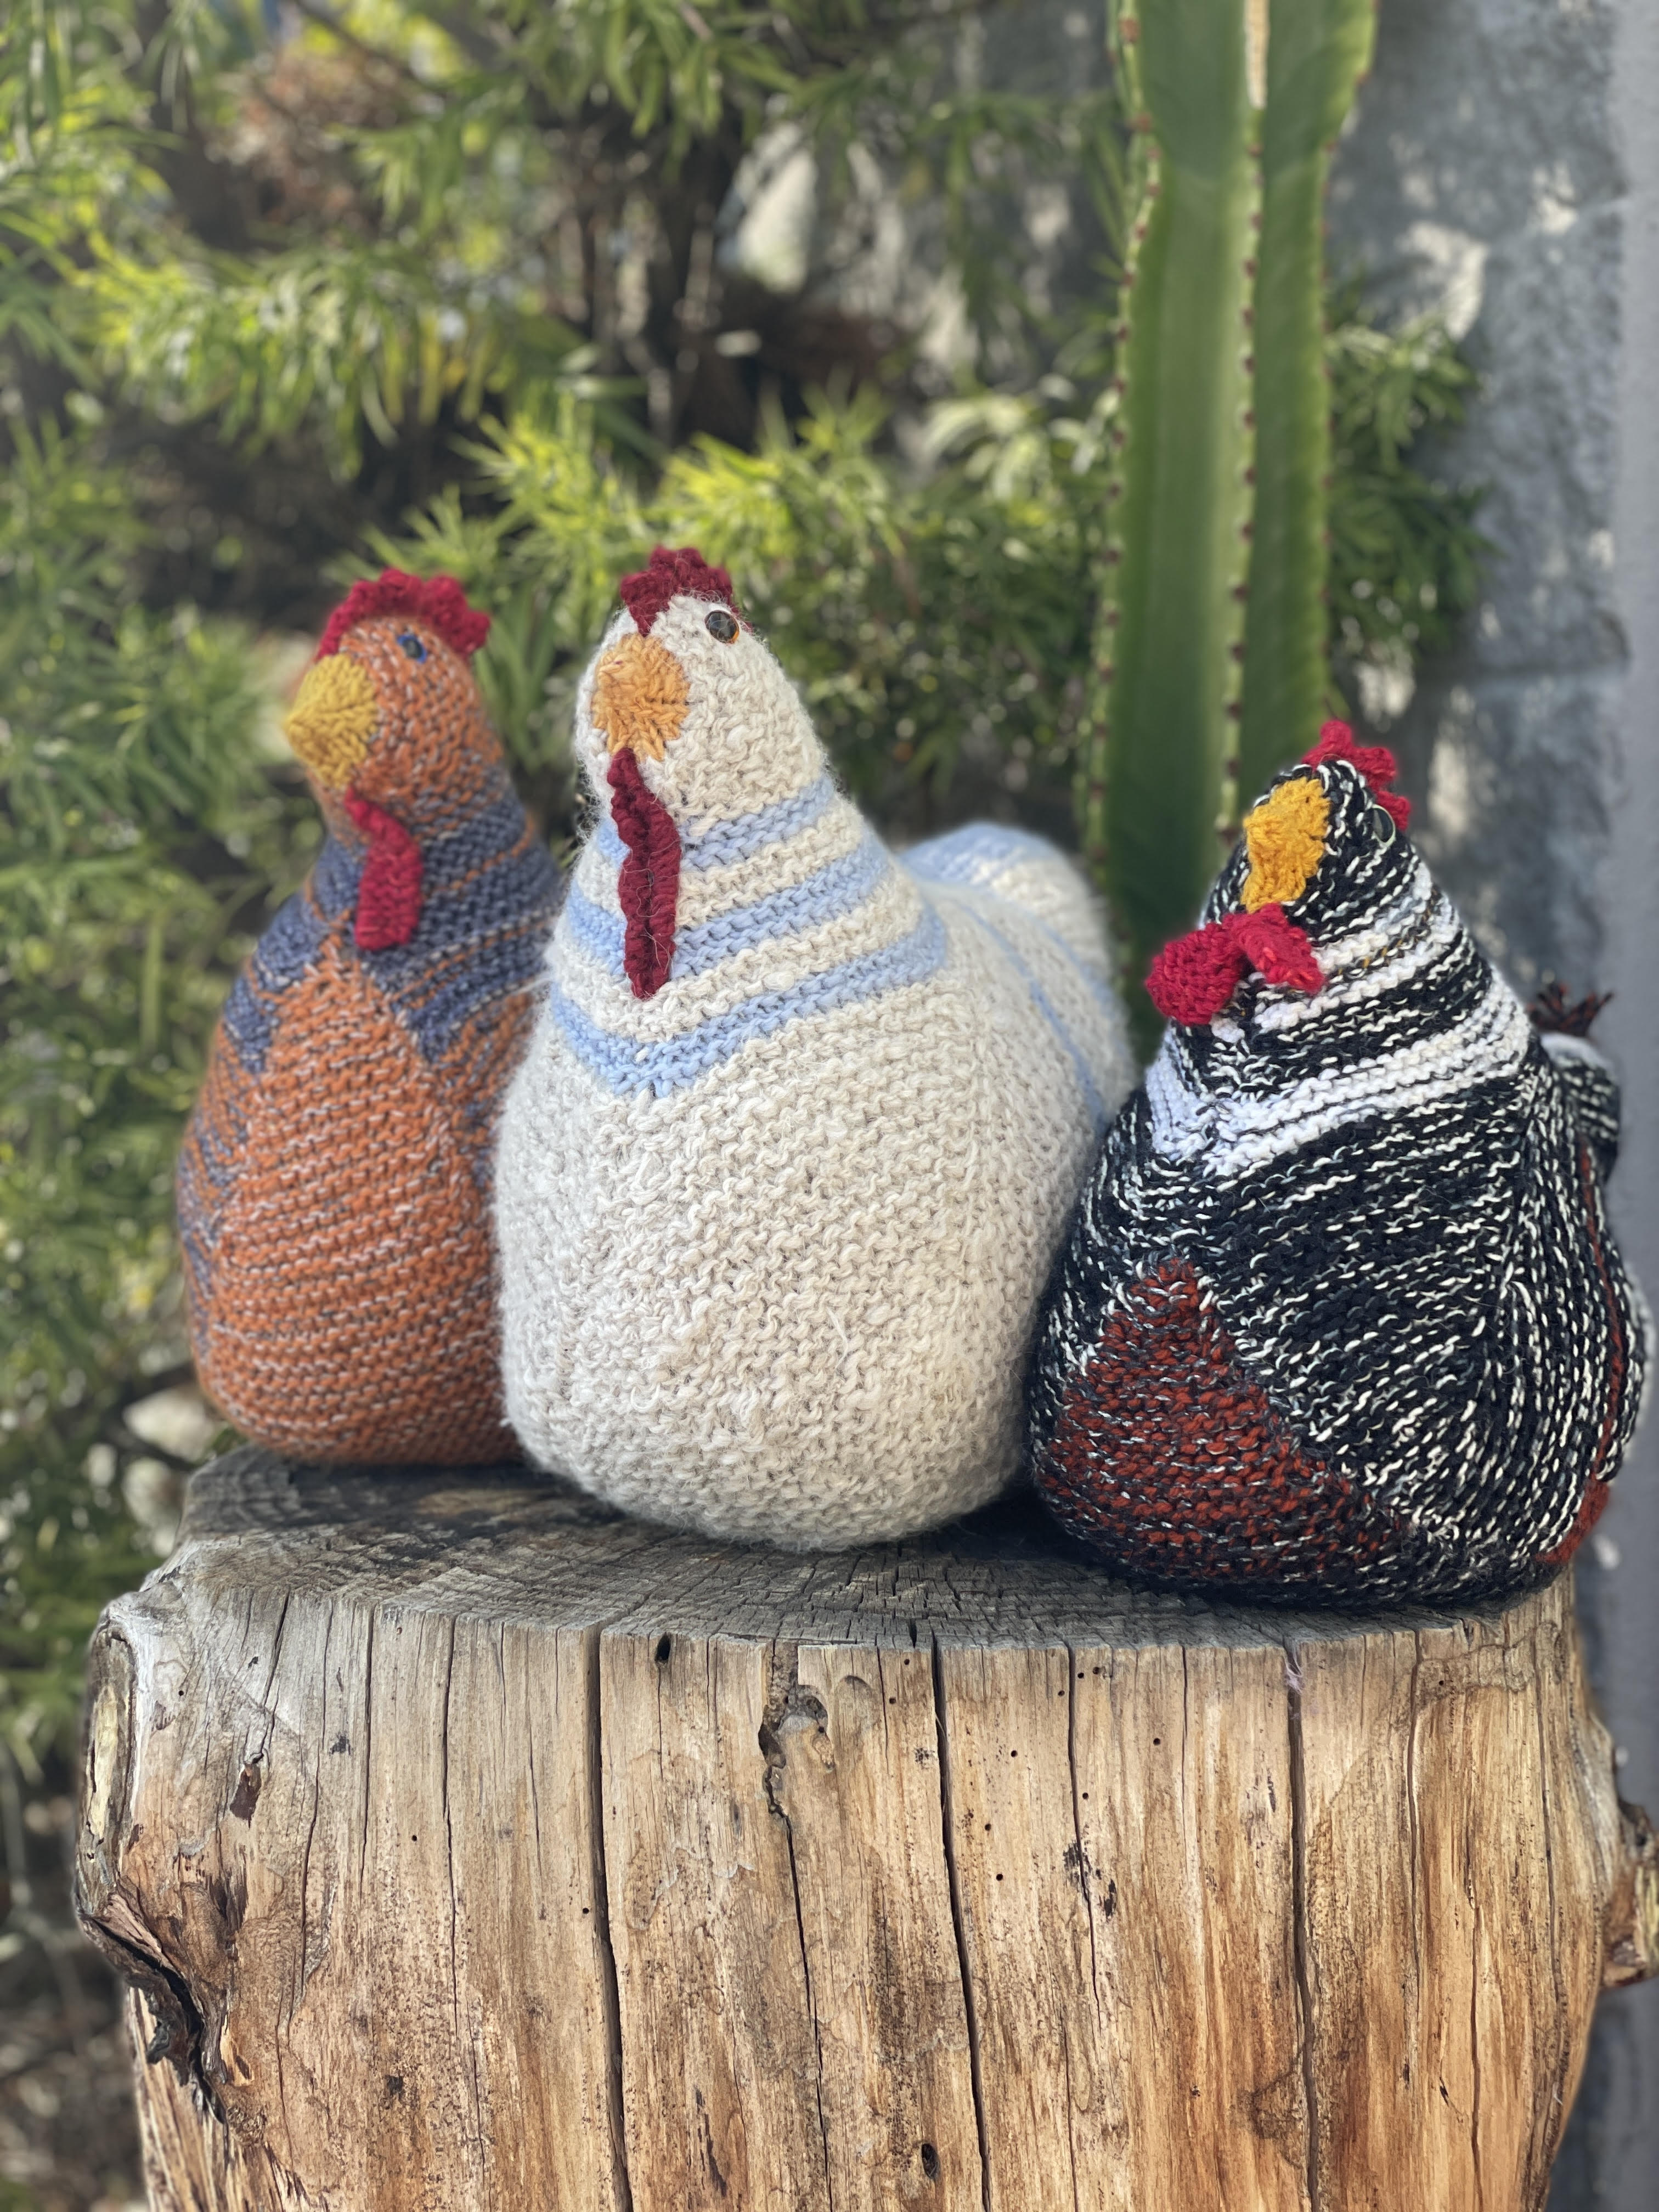 Ravelry: Emotional Support Chicken pattern by Annette Corsino